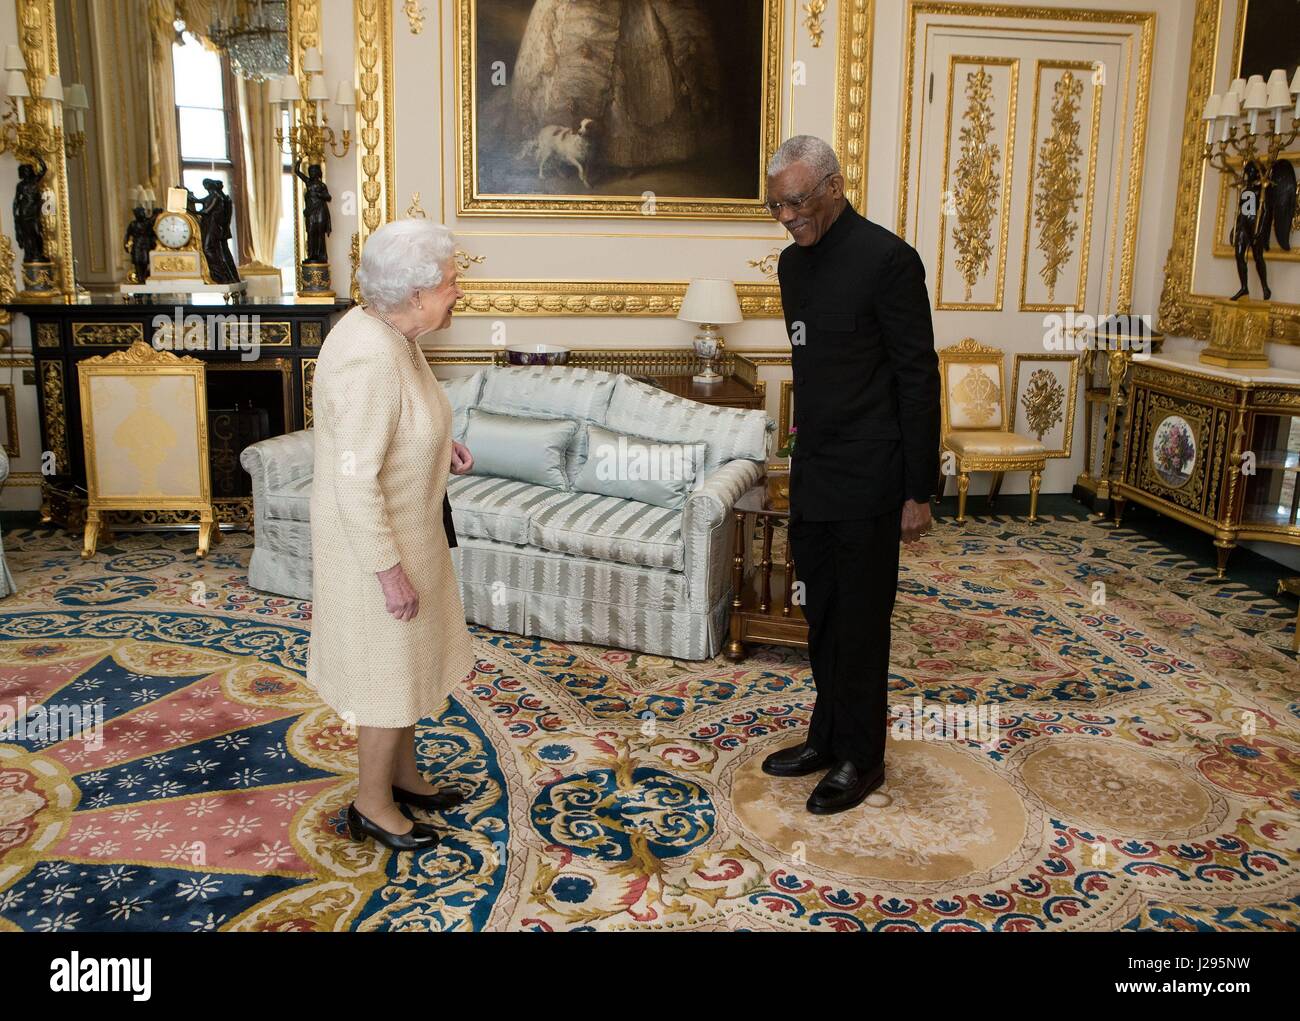 Queen Elizabeth II meets His Excellency David Granger, President of the Co-operative Republic of Guyana, during a a private audience with Her Majesty at Windsor Castle, Berkshire. Stock Photo